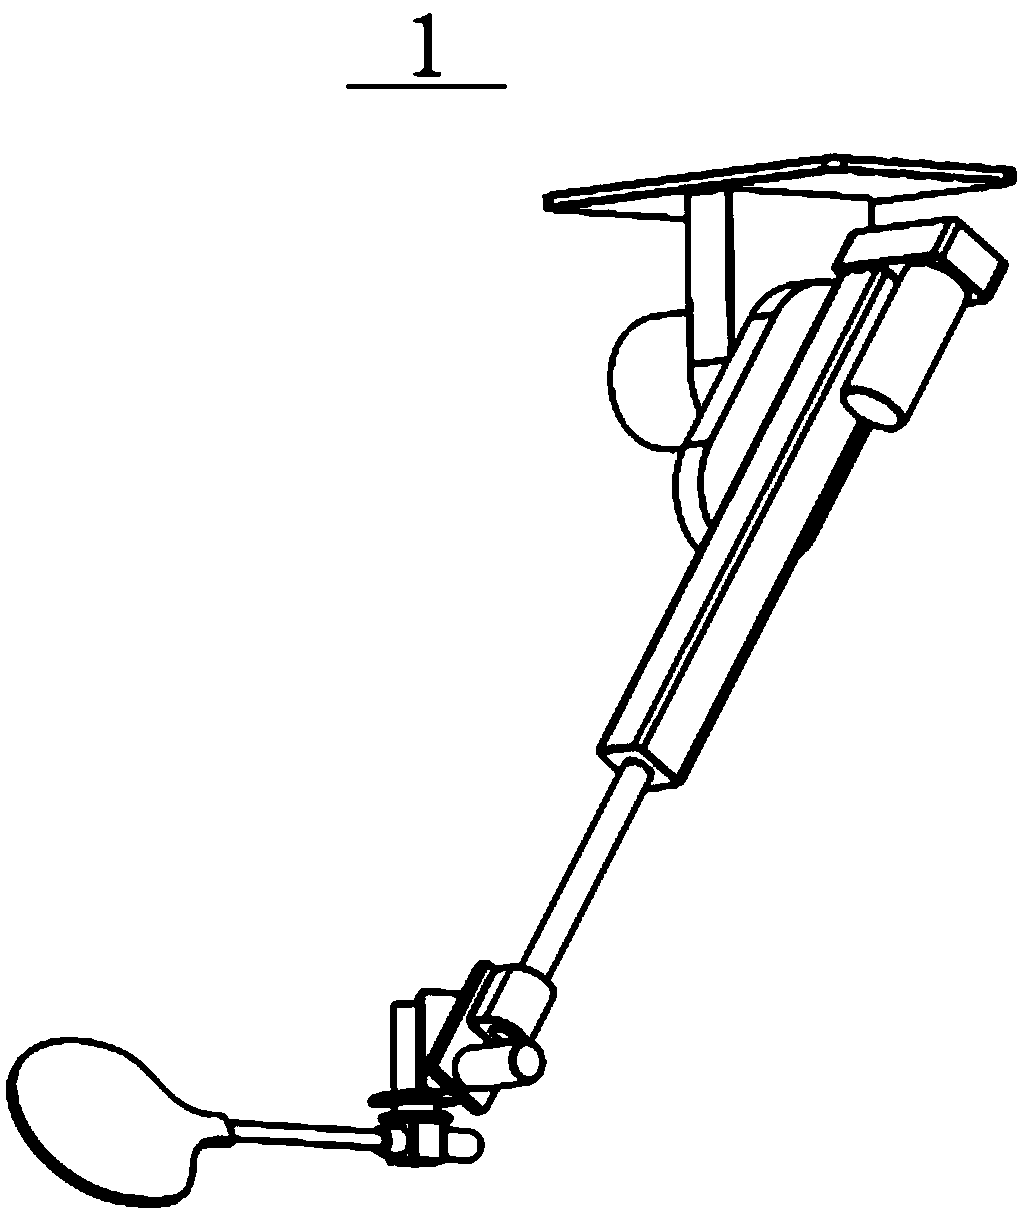 Mechanical arm and table tennis robot comprising mechanical arm